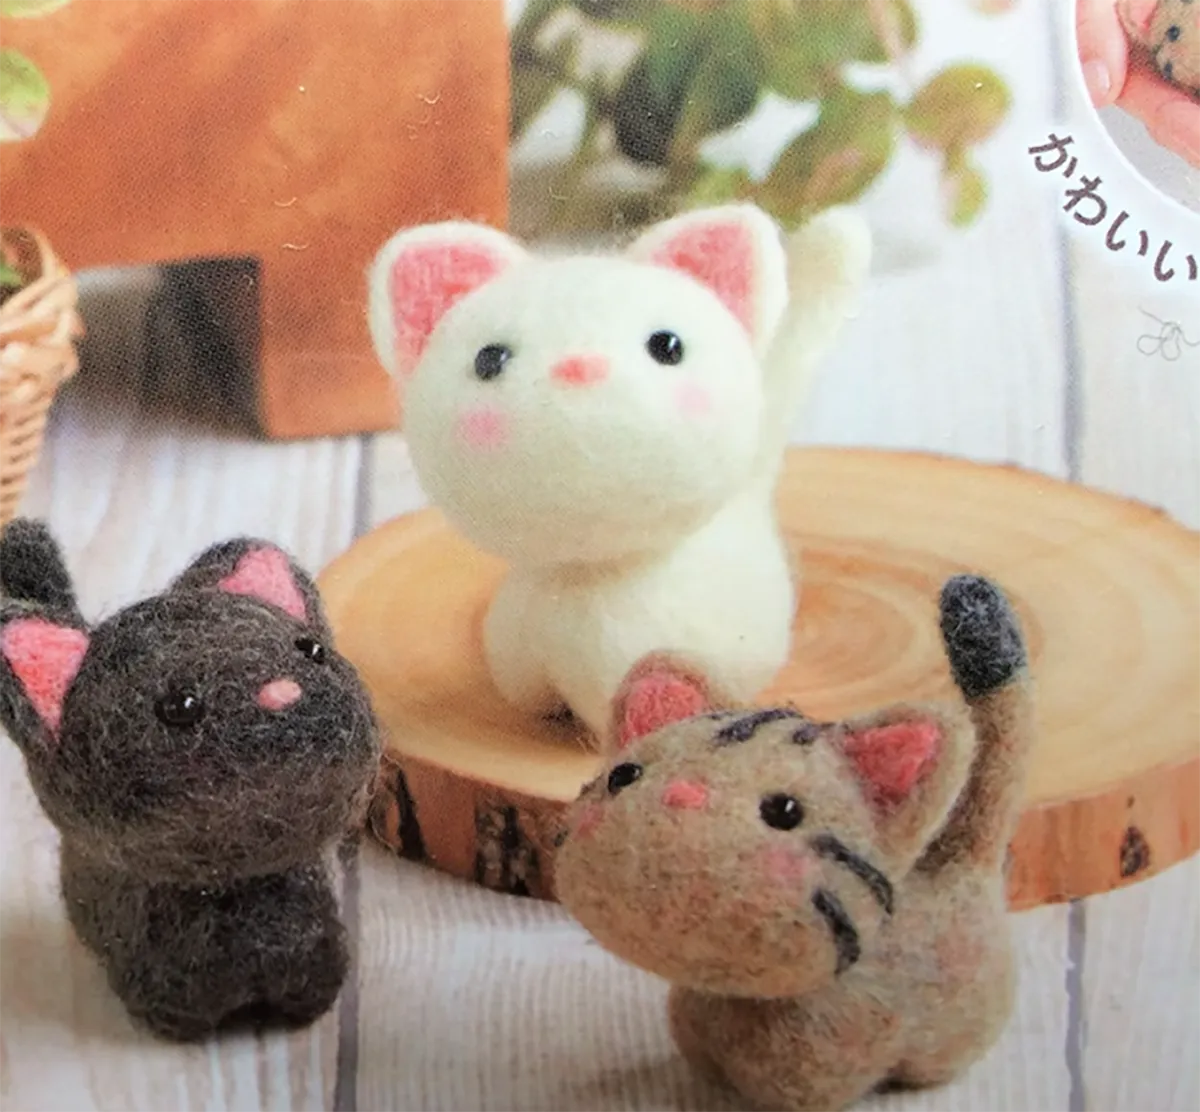 18 of the best needle felting kits for beginners 2024 - Gathered